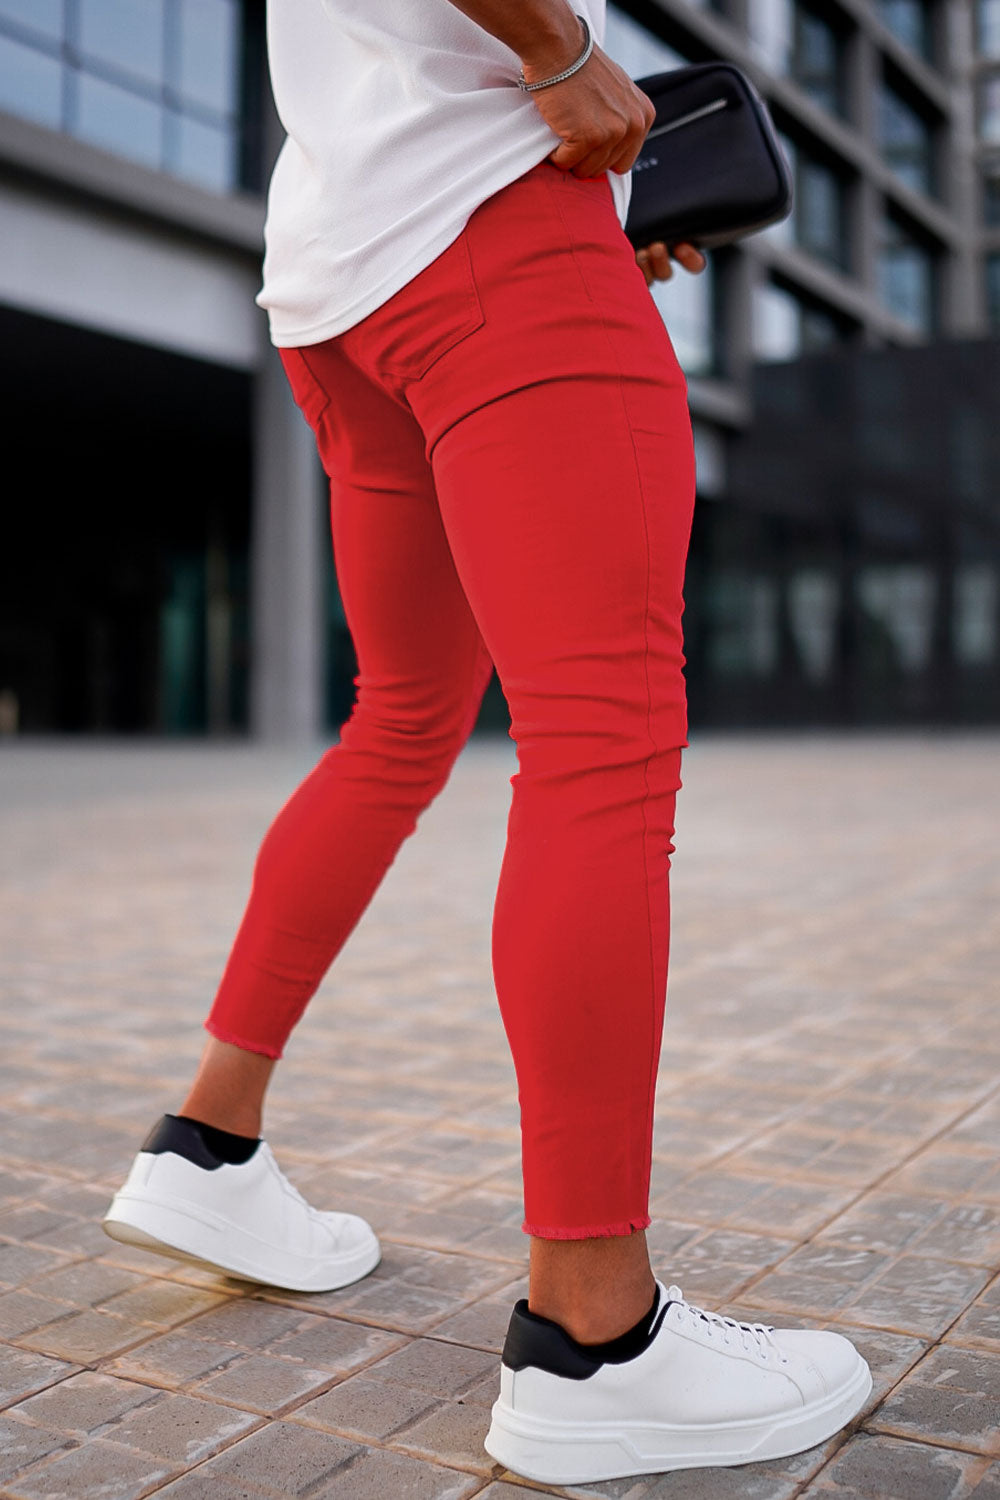 GINGTTO Mens Premium High Rise Colored Jeans-Red, Jeans New, Mens Skinny Jeans, Skinny Jeans Men, Fit Jeans, Mens Jeans Sale, 50% off Discount